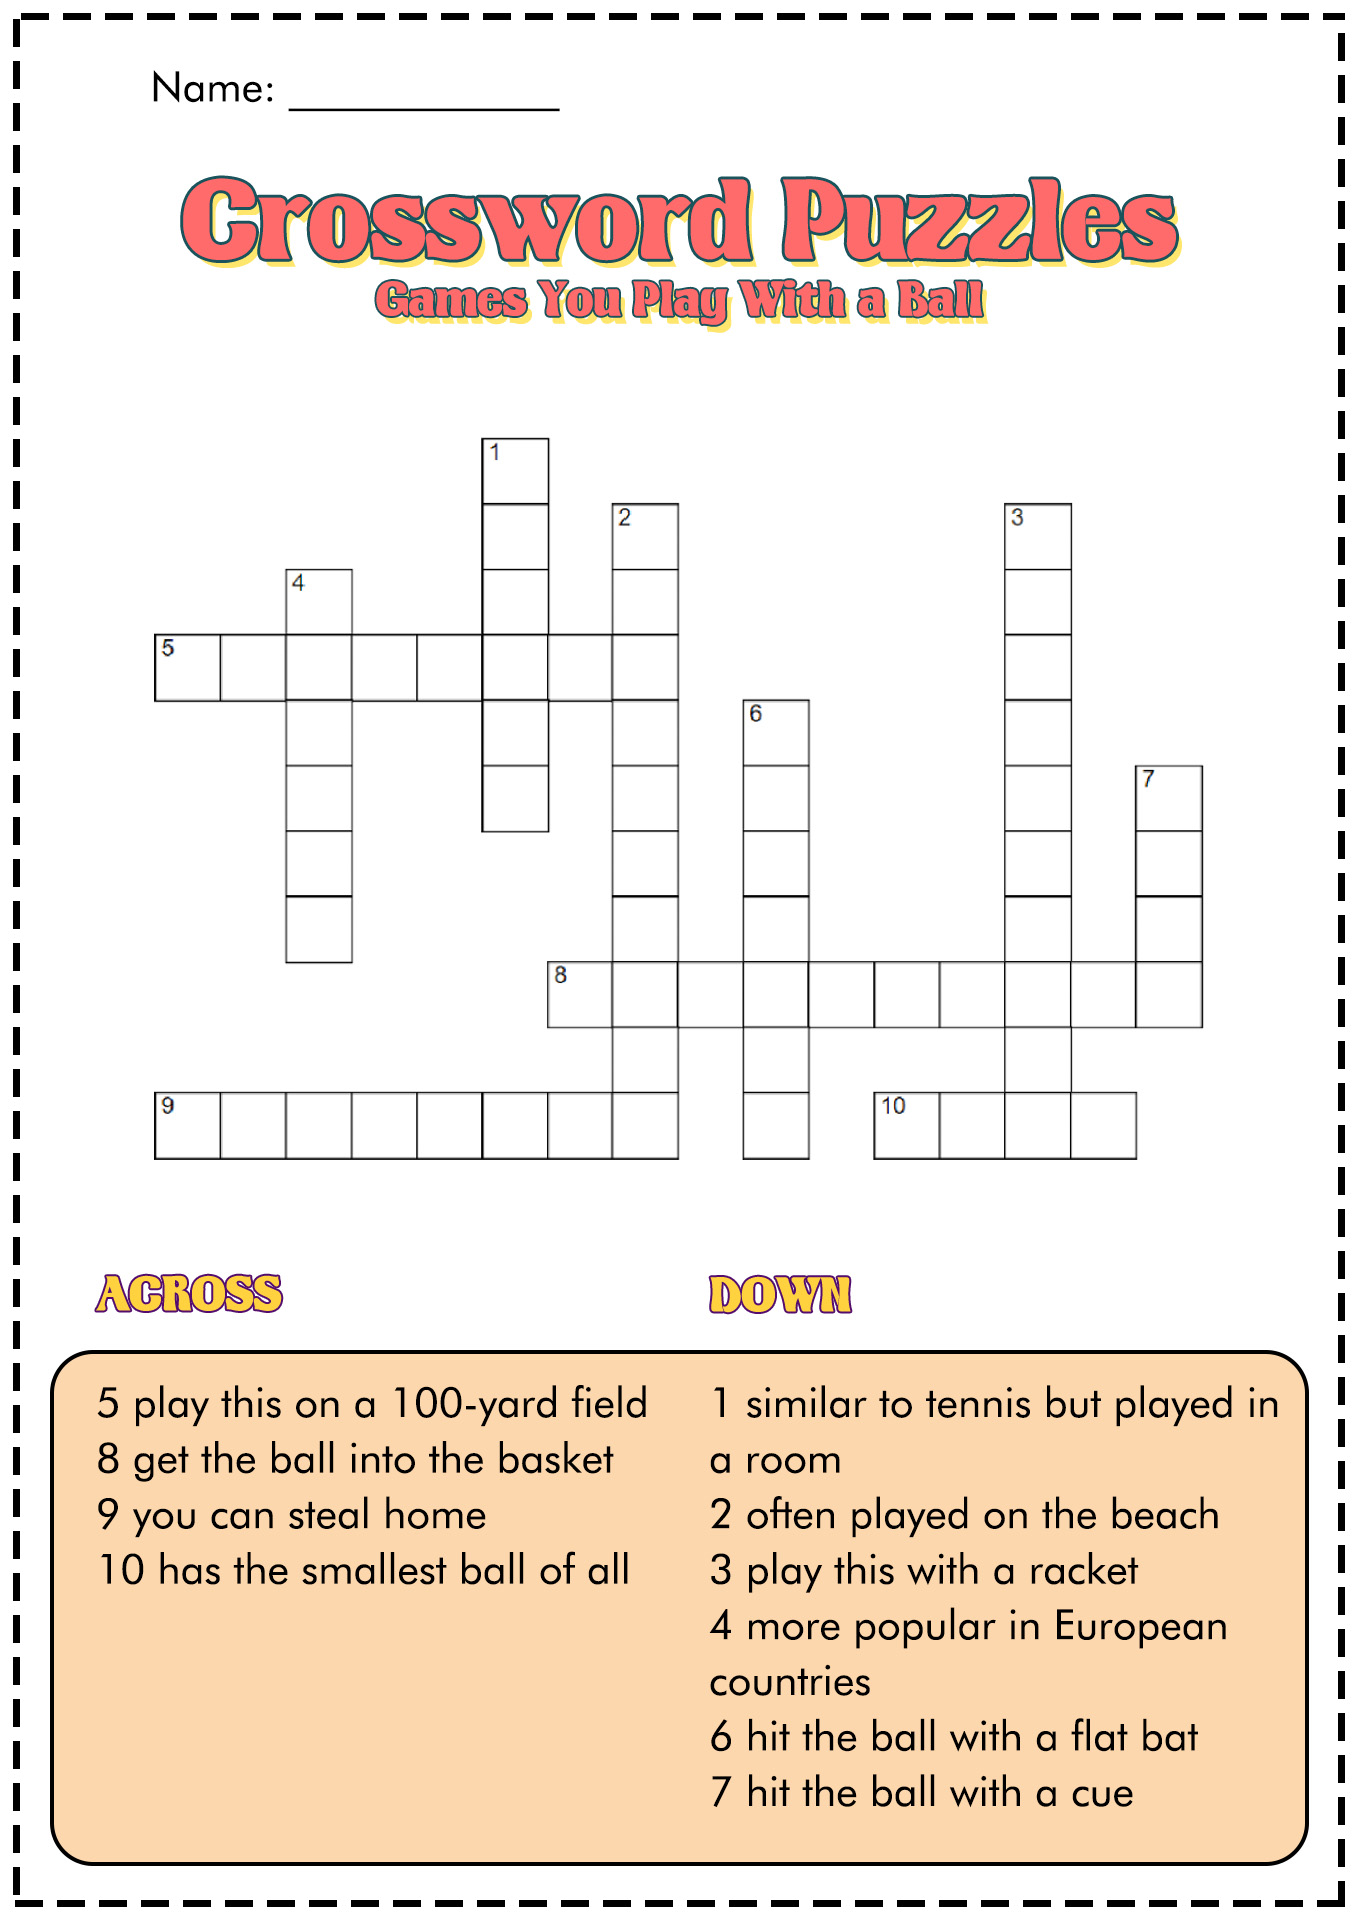 Crossword Puzzle Worksheets Image